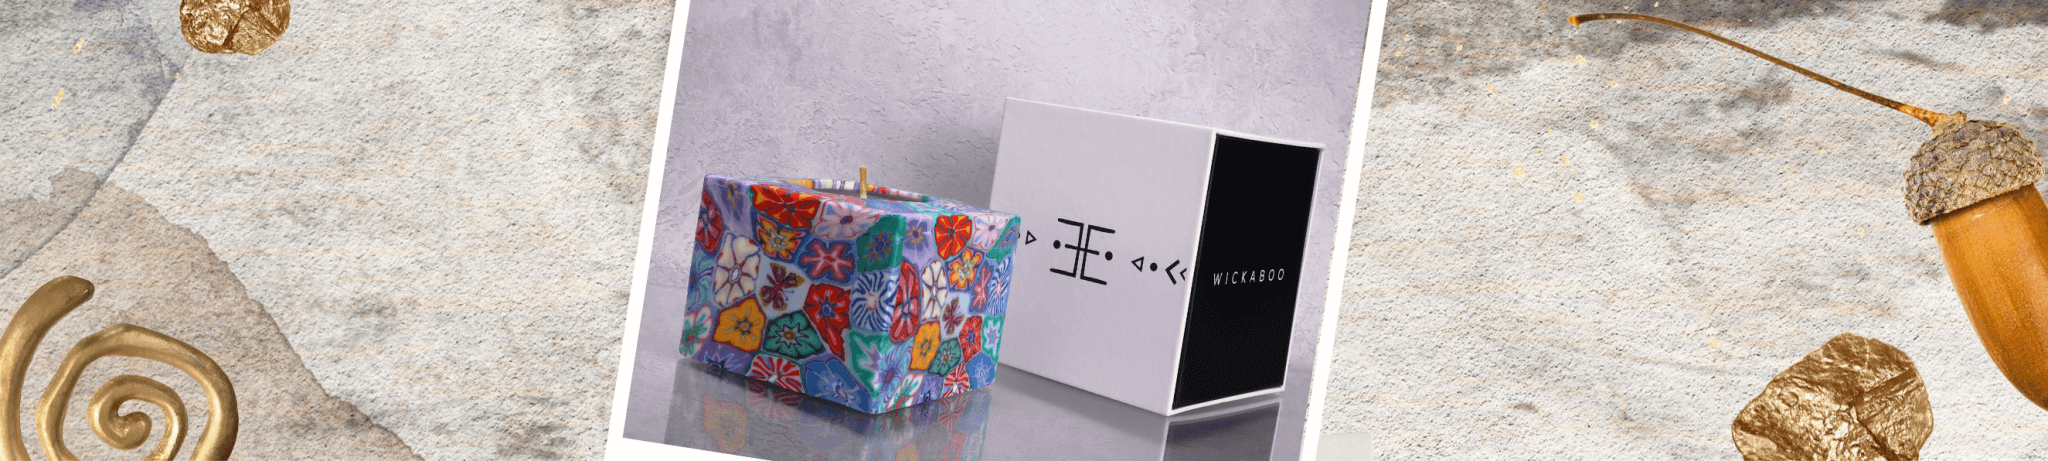 Cube Candles | Wickaboo